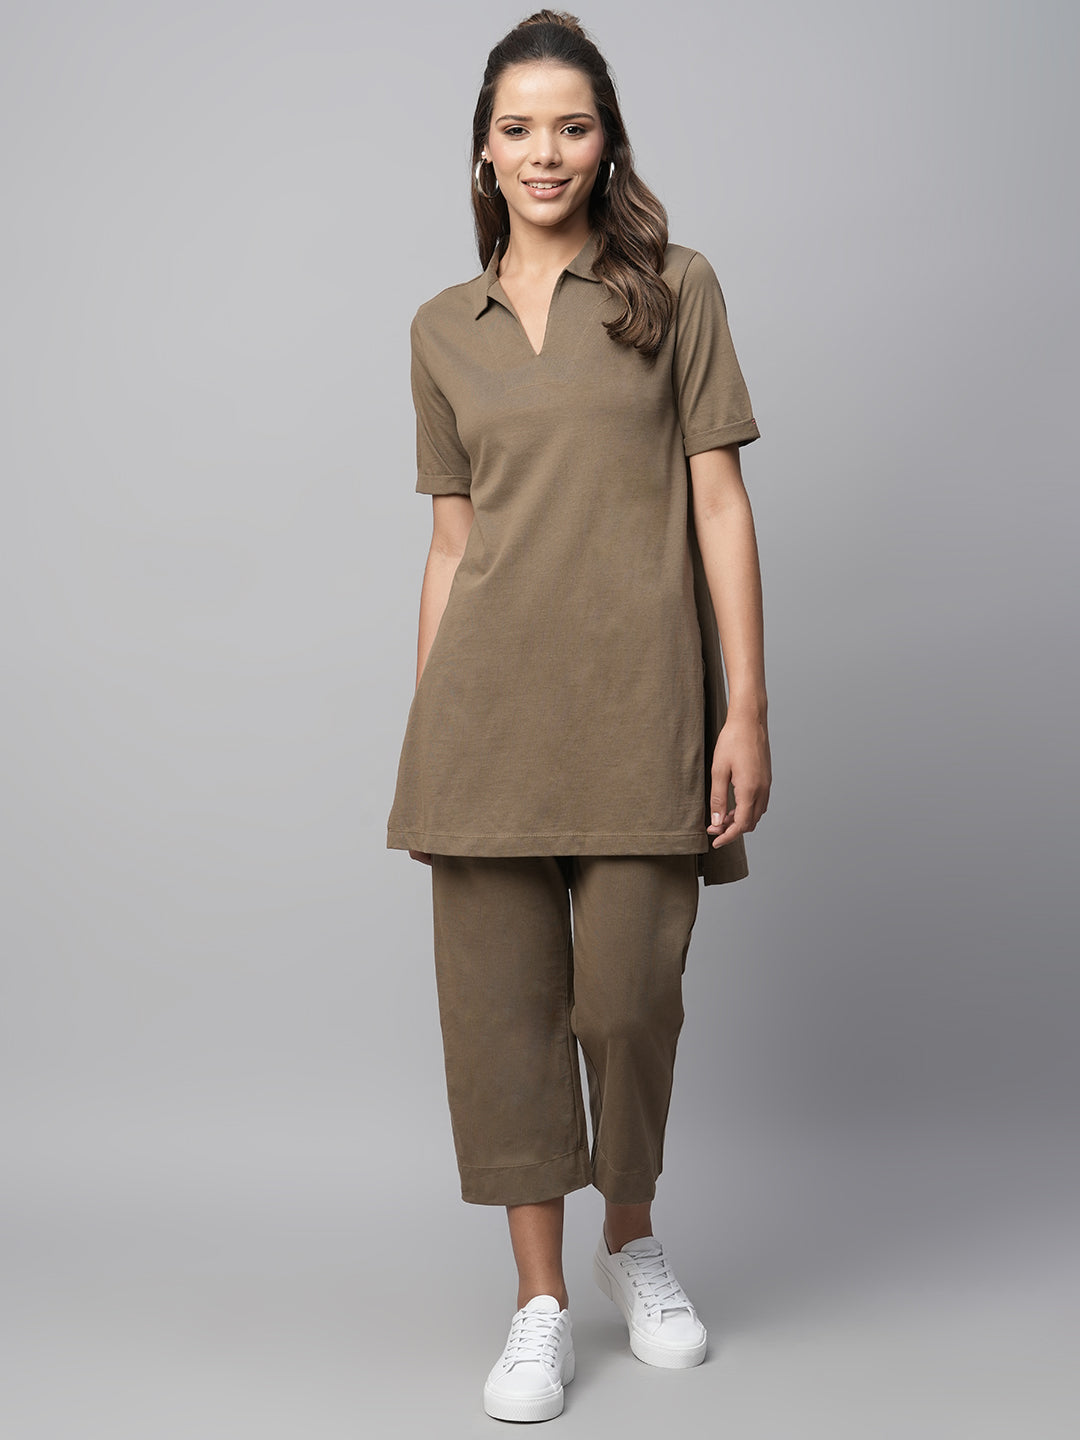 Cotton Jersey Longline Tee W/ High Slits And Cropped Slim Pant Set